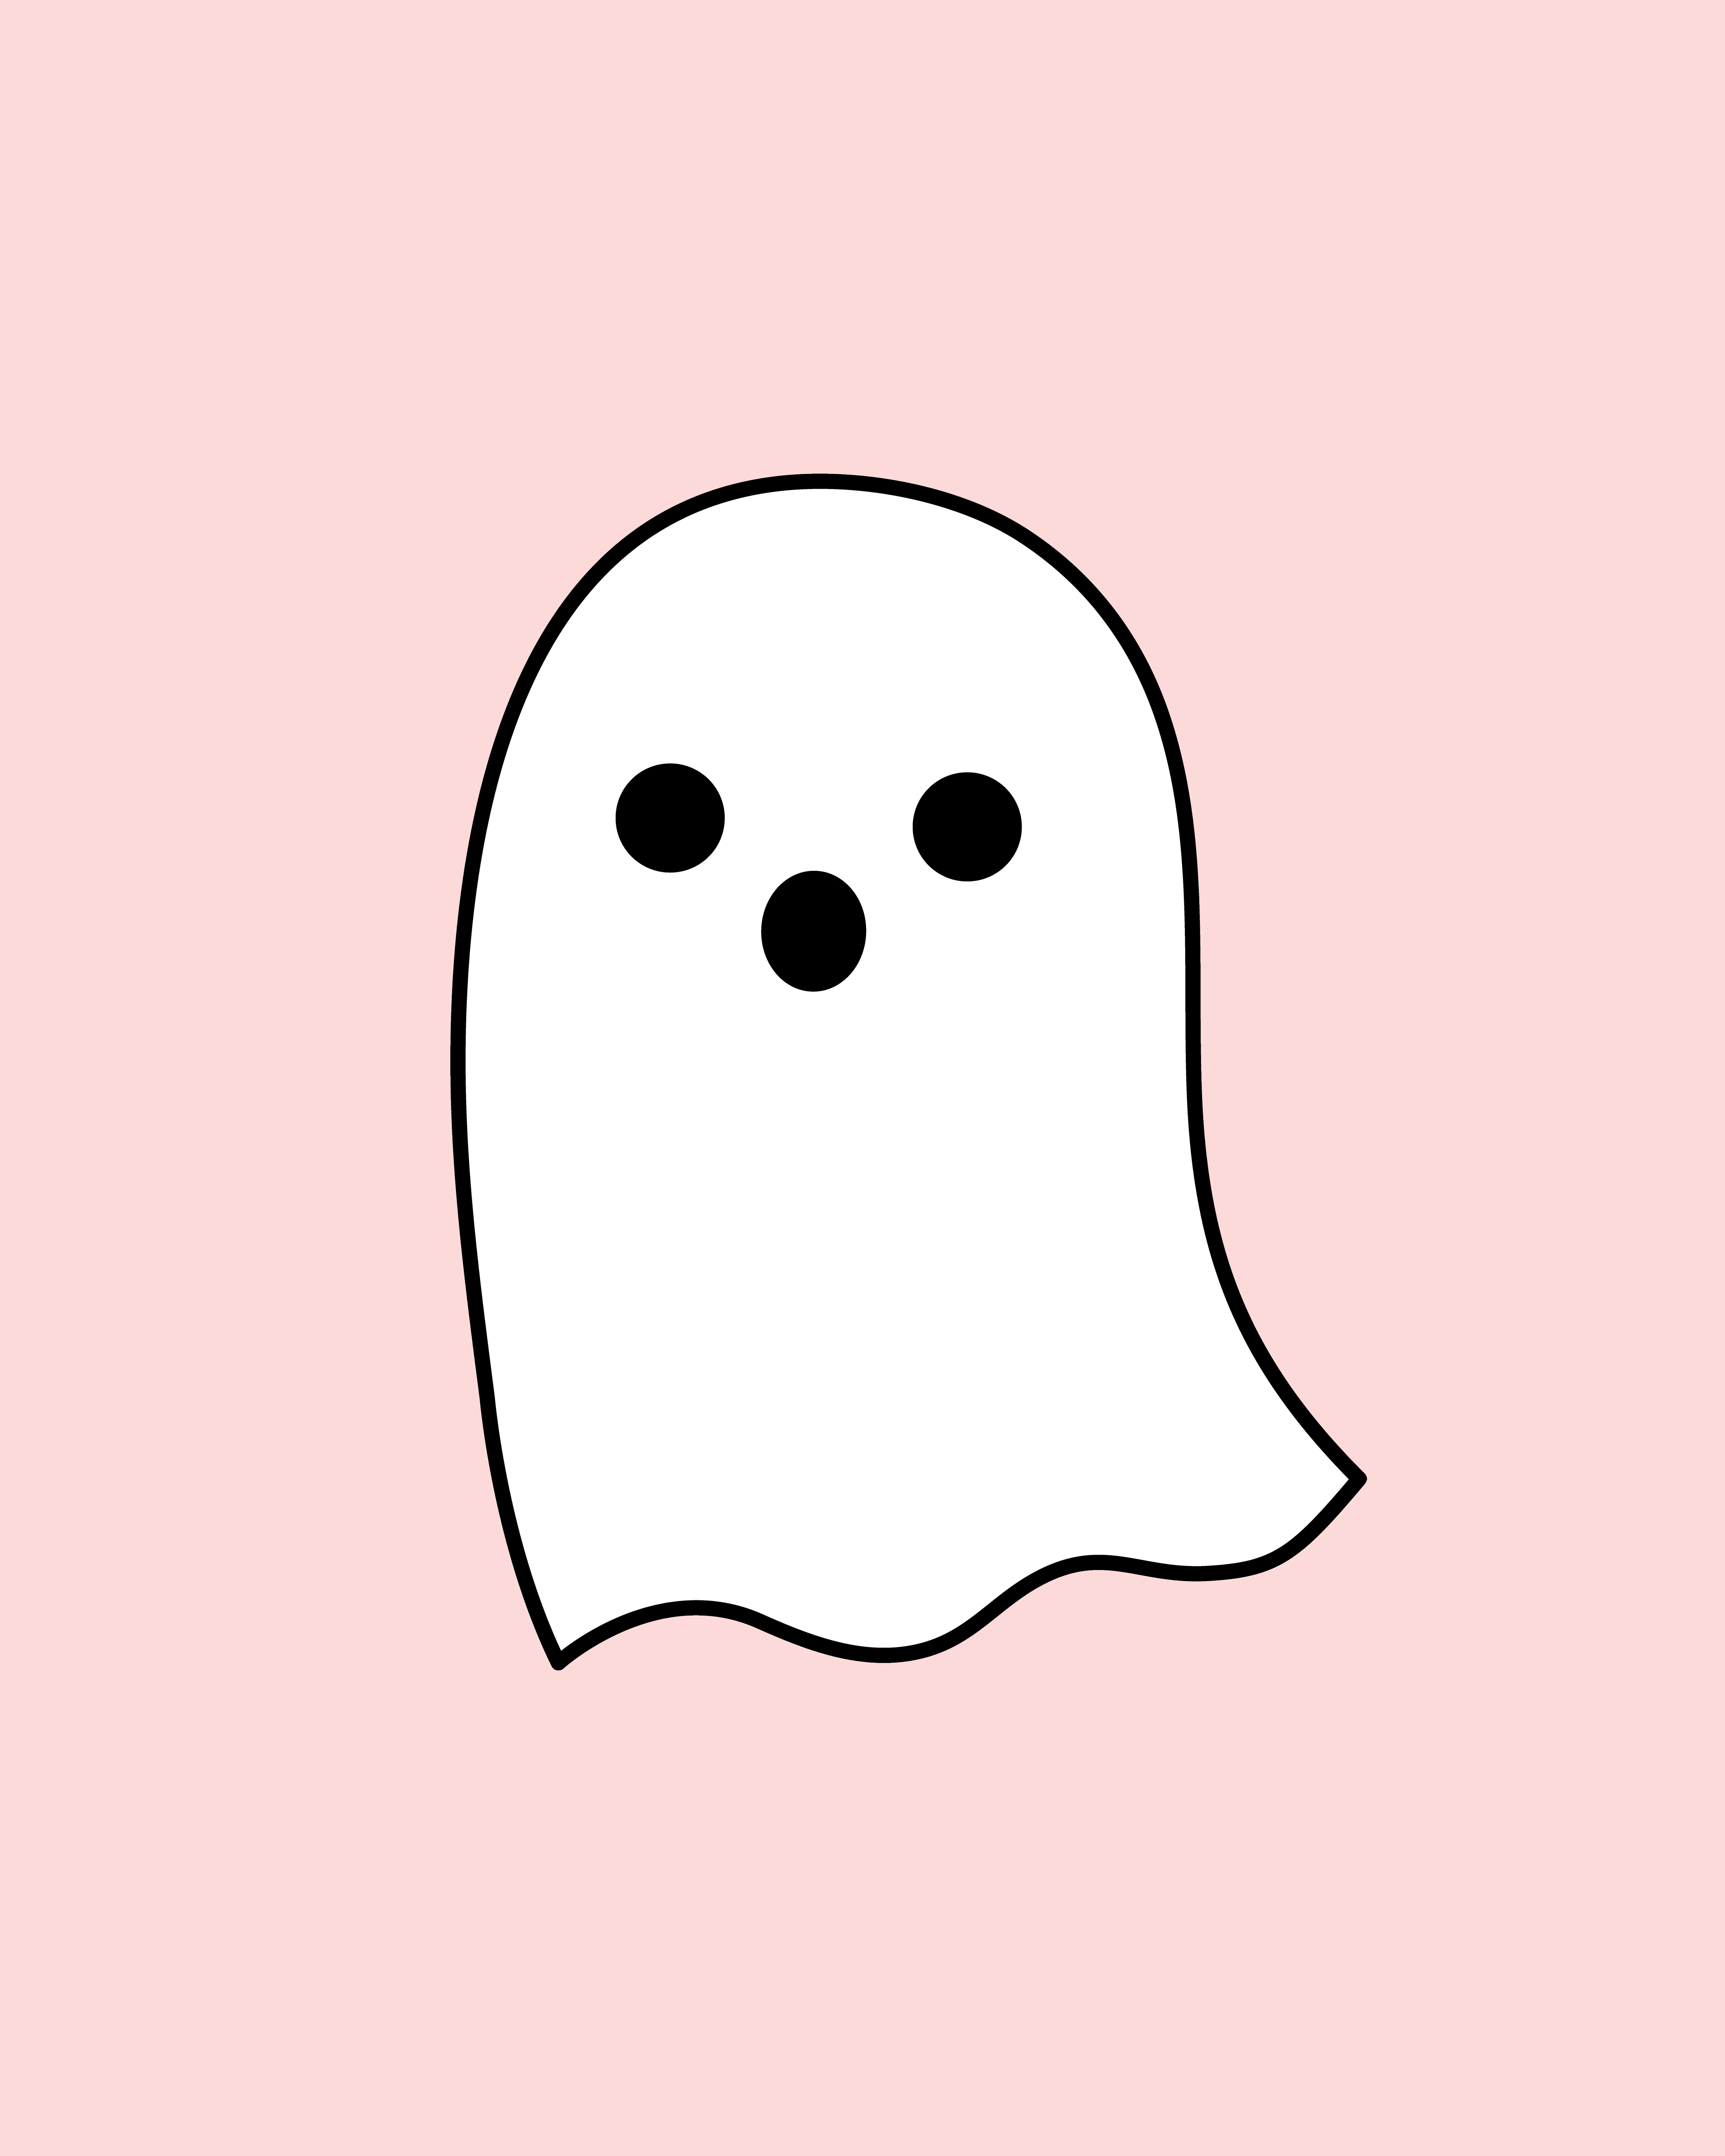 Pin the Boo on the Ghost Free Printable for Halloween!